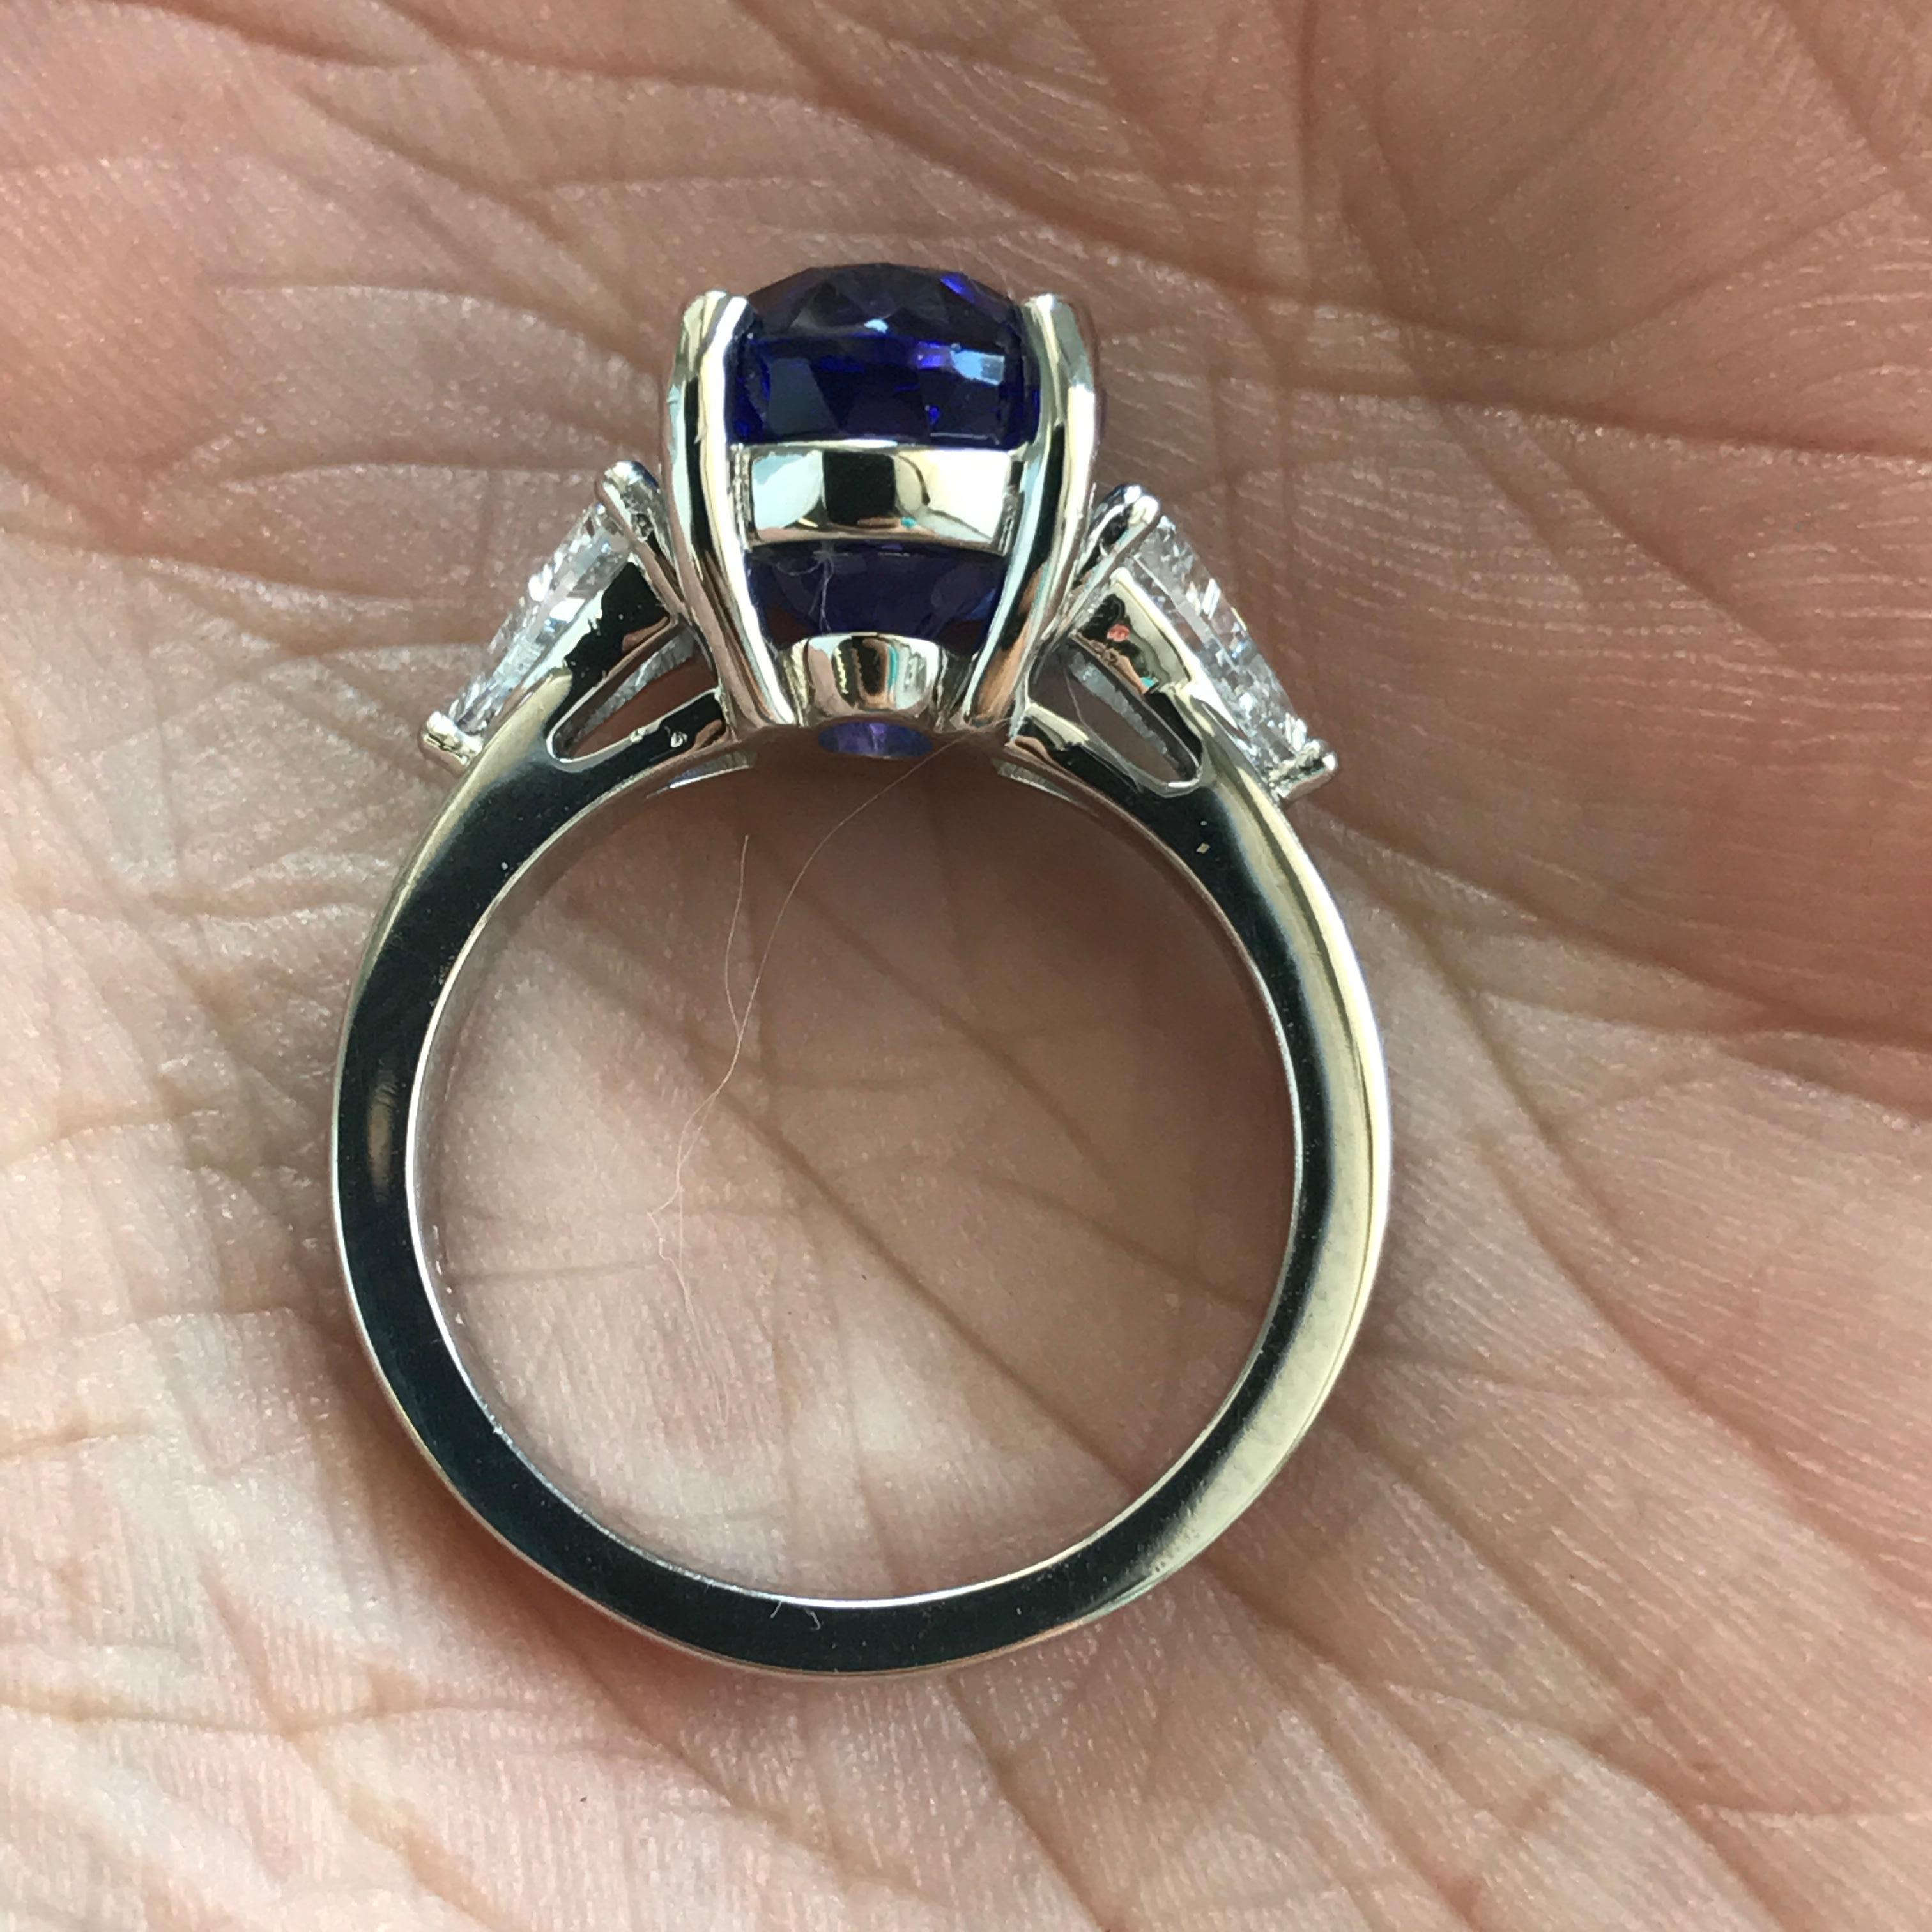 Ring will be made to order for your finger size, please allow 3-6 weeks.

Stunning 5.00 Carat  Oval Tanzanite set in a hand designed 18k White Gold.

AS011 - 19000010

Center Stone Details: 
Gem Type: Tazanite
Carat weight:  5.00+
Shape: Oval
Color: